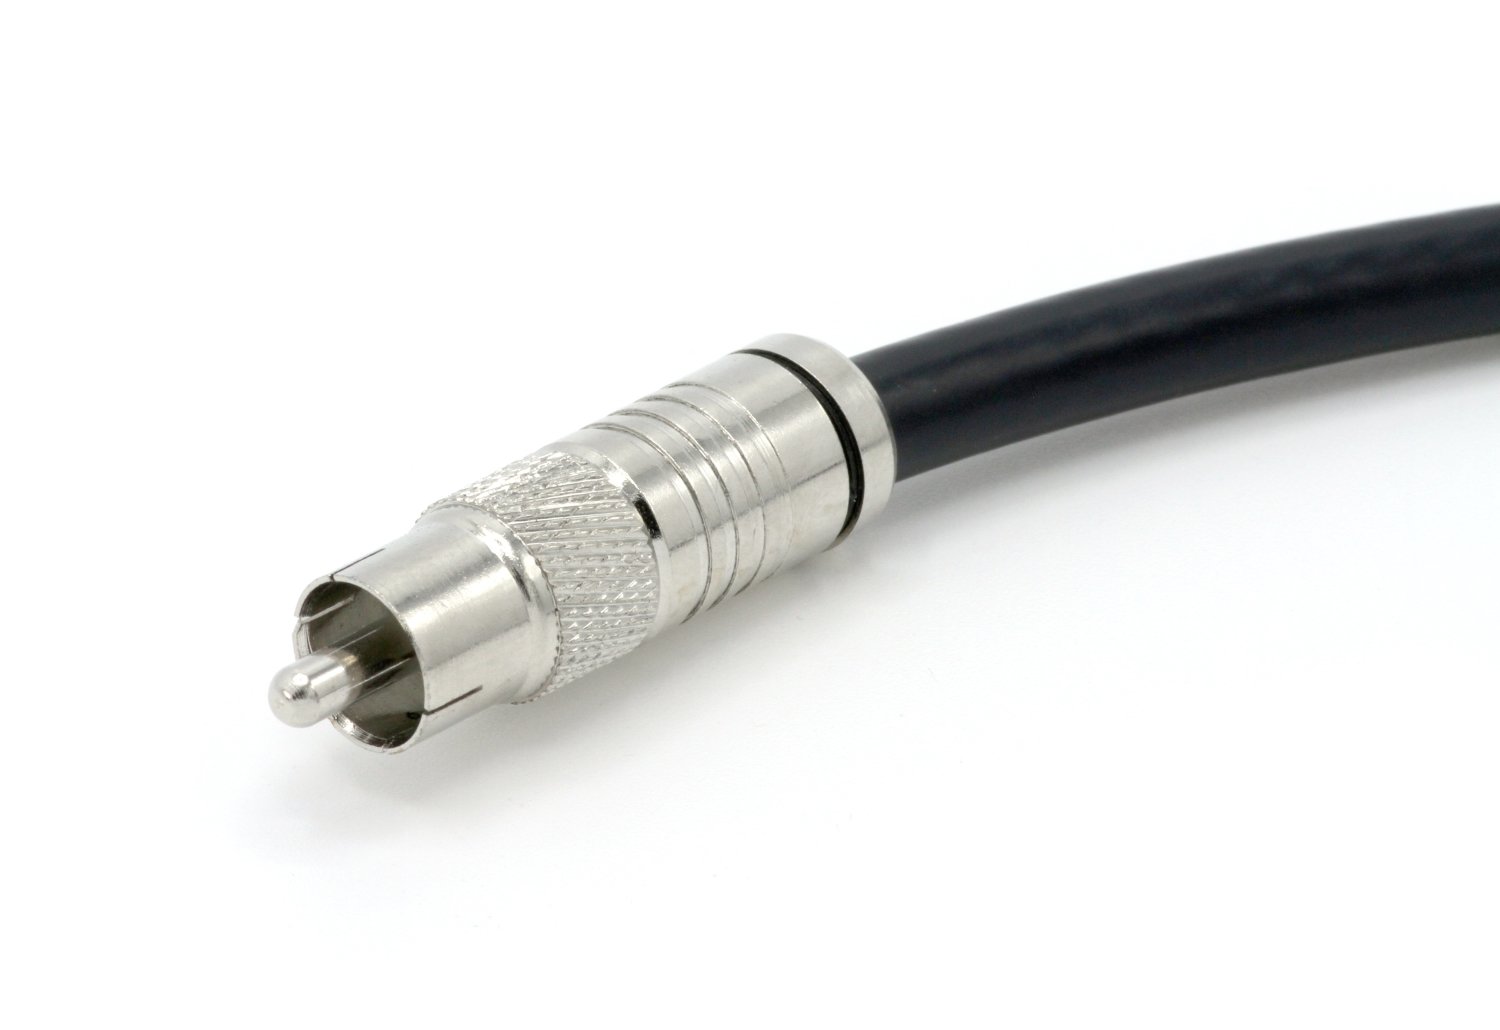 THE CIMPLE CO - Digital Audio Coaxial Cable - Subwoofer Cable - (S/PDIF) RCA Cable, 200 Feet - image 2 of 6